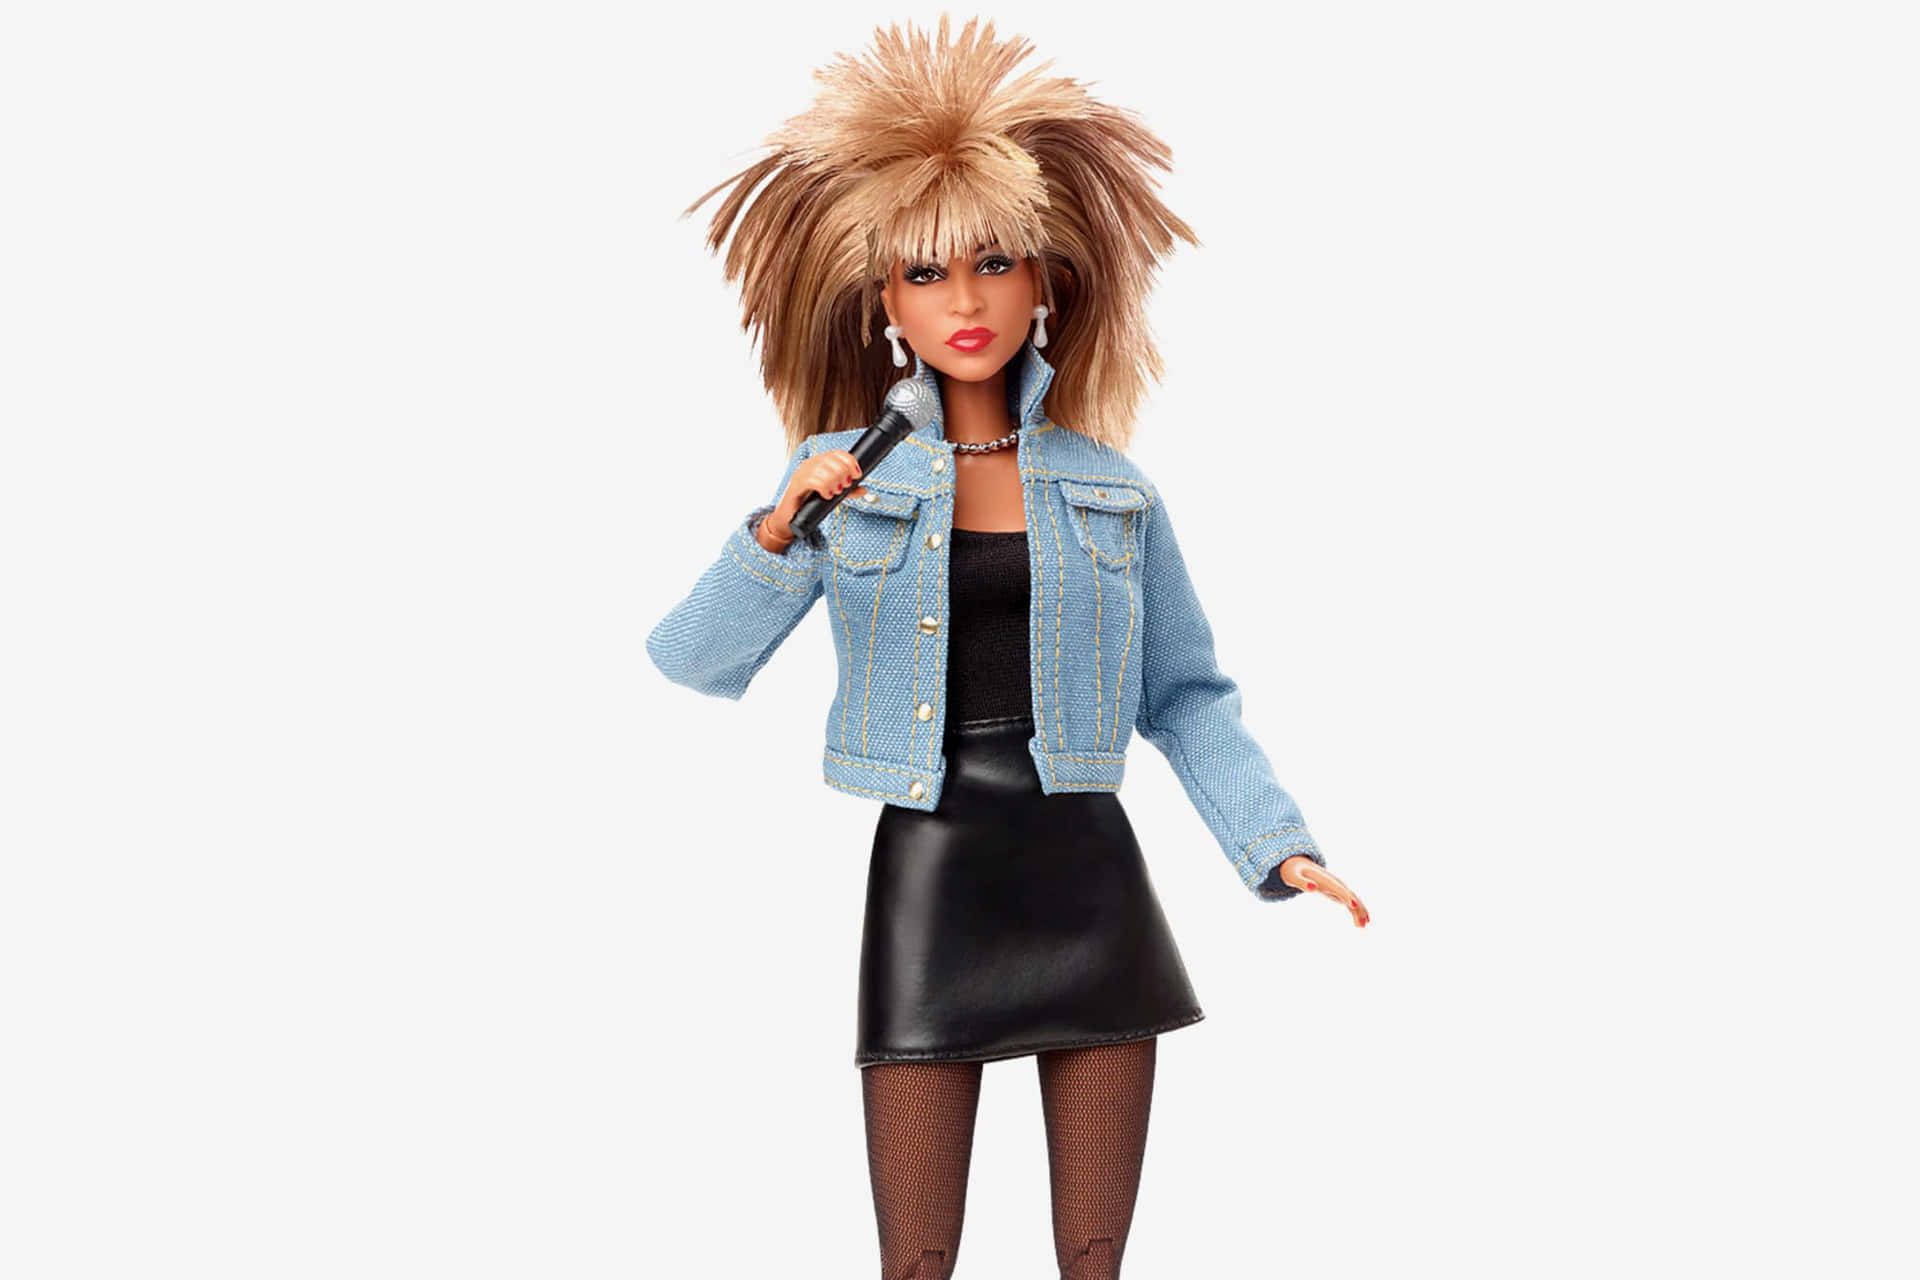 Barbie Doll With Long Hair And A Jacket